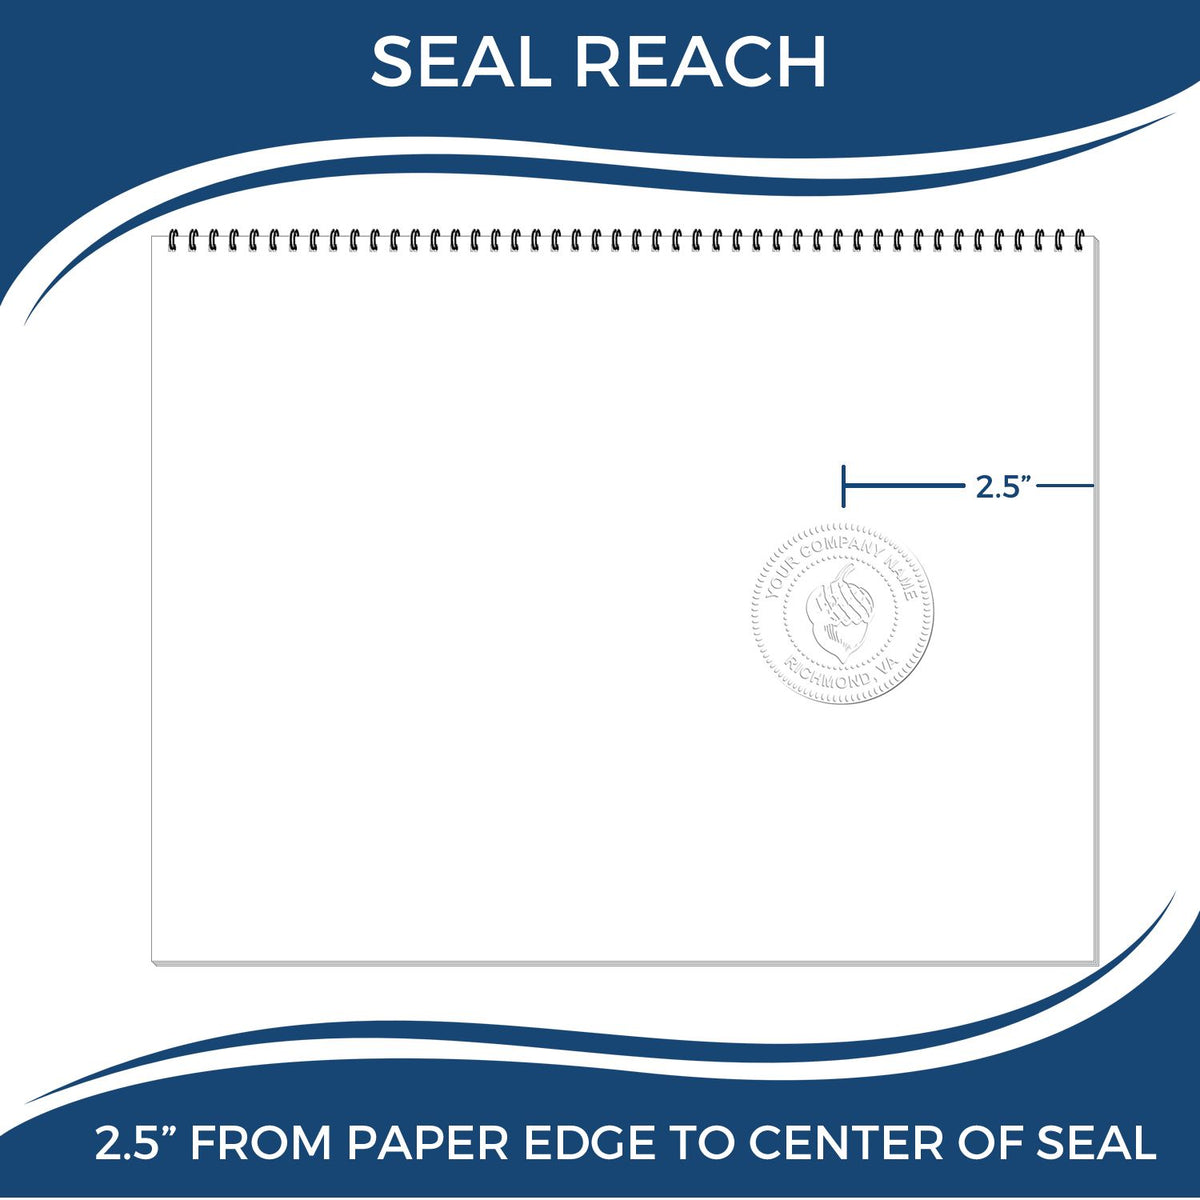 An infographic showing the seal reach which is represented by a ruler and a miniature seal image of the Long Reach Alabama PE Seal